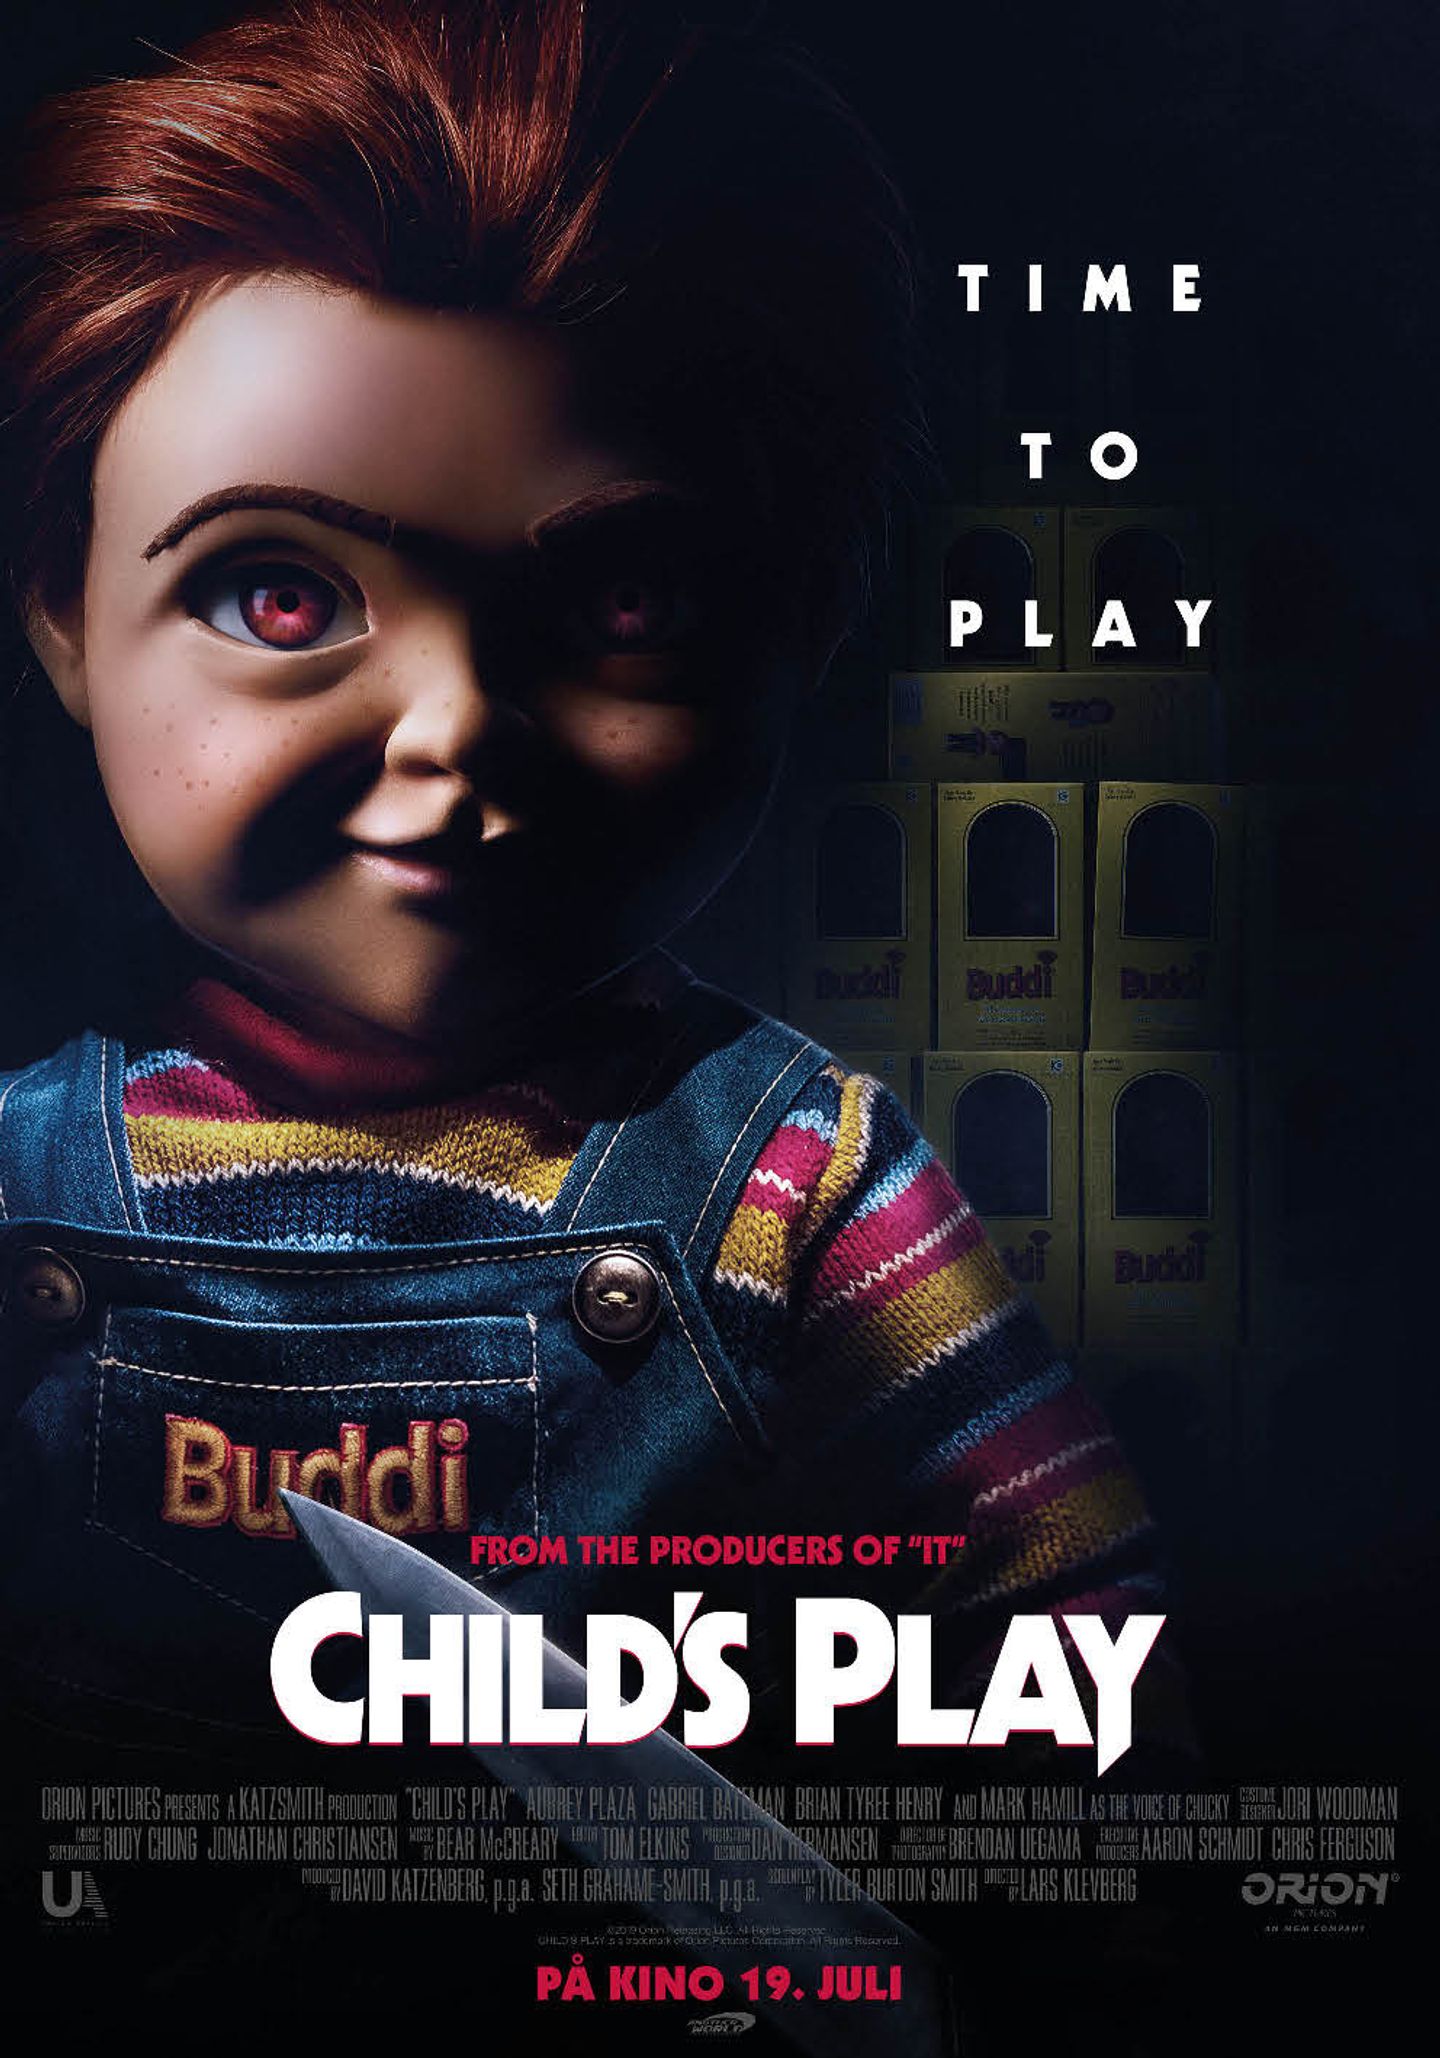 Plakat for 'Child's Play'